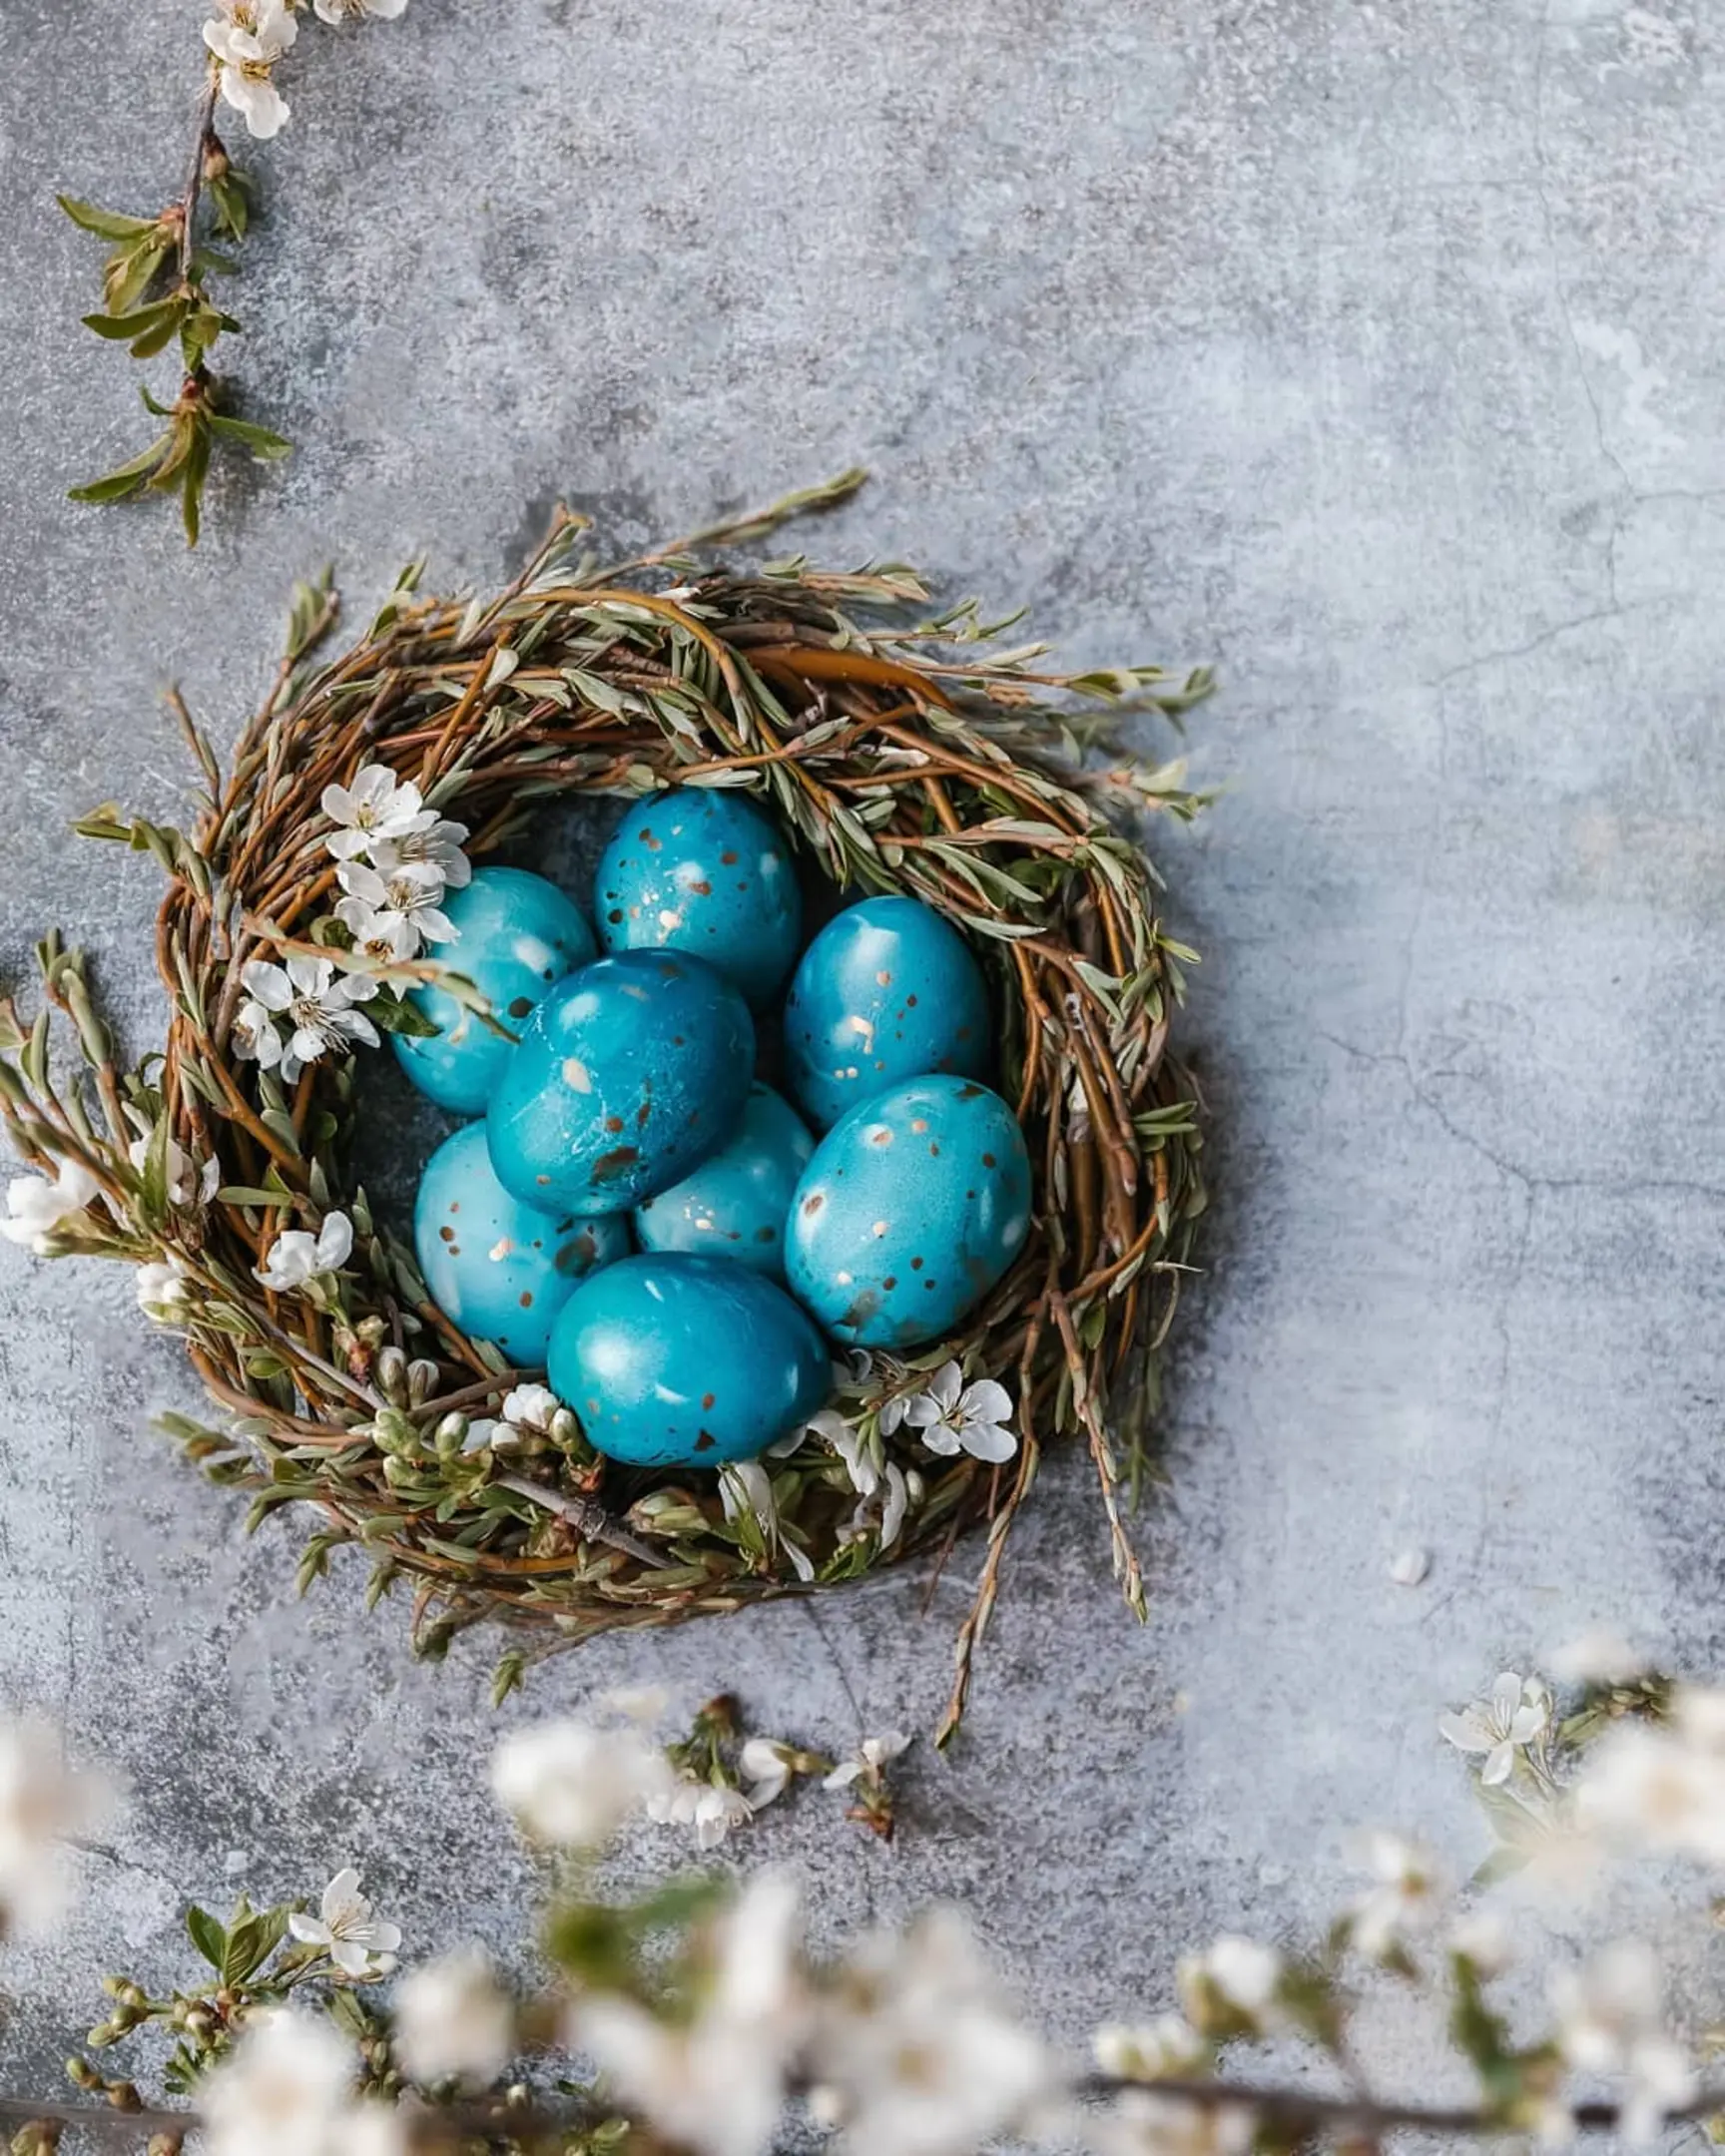 Blue-speckled eggs lie in a nest with flowers.  Blue-speckled eggs lie in a nest with flowers. Branches with flowers are visible in the foreground. The nest is on a gray-blue concrete background.